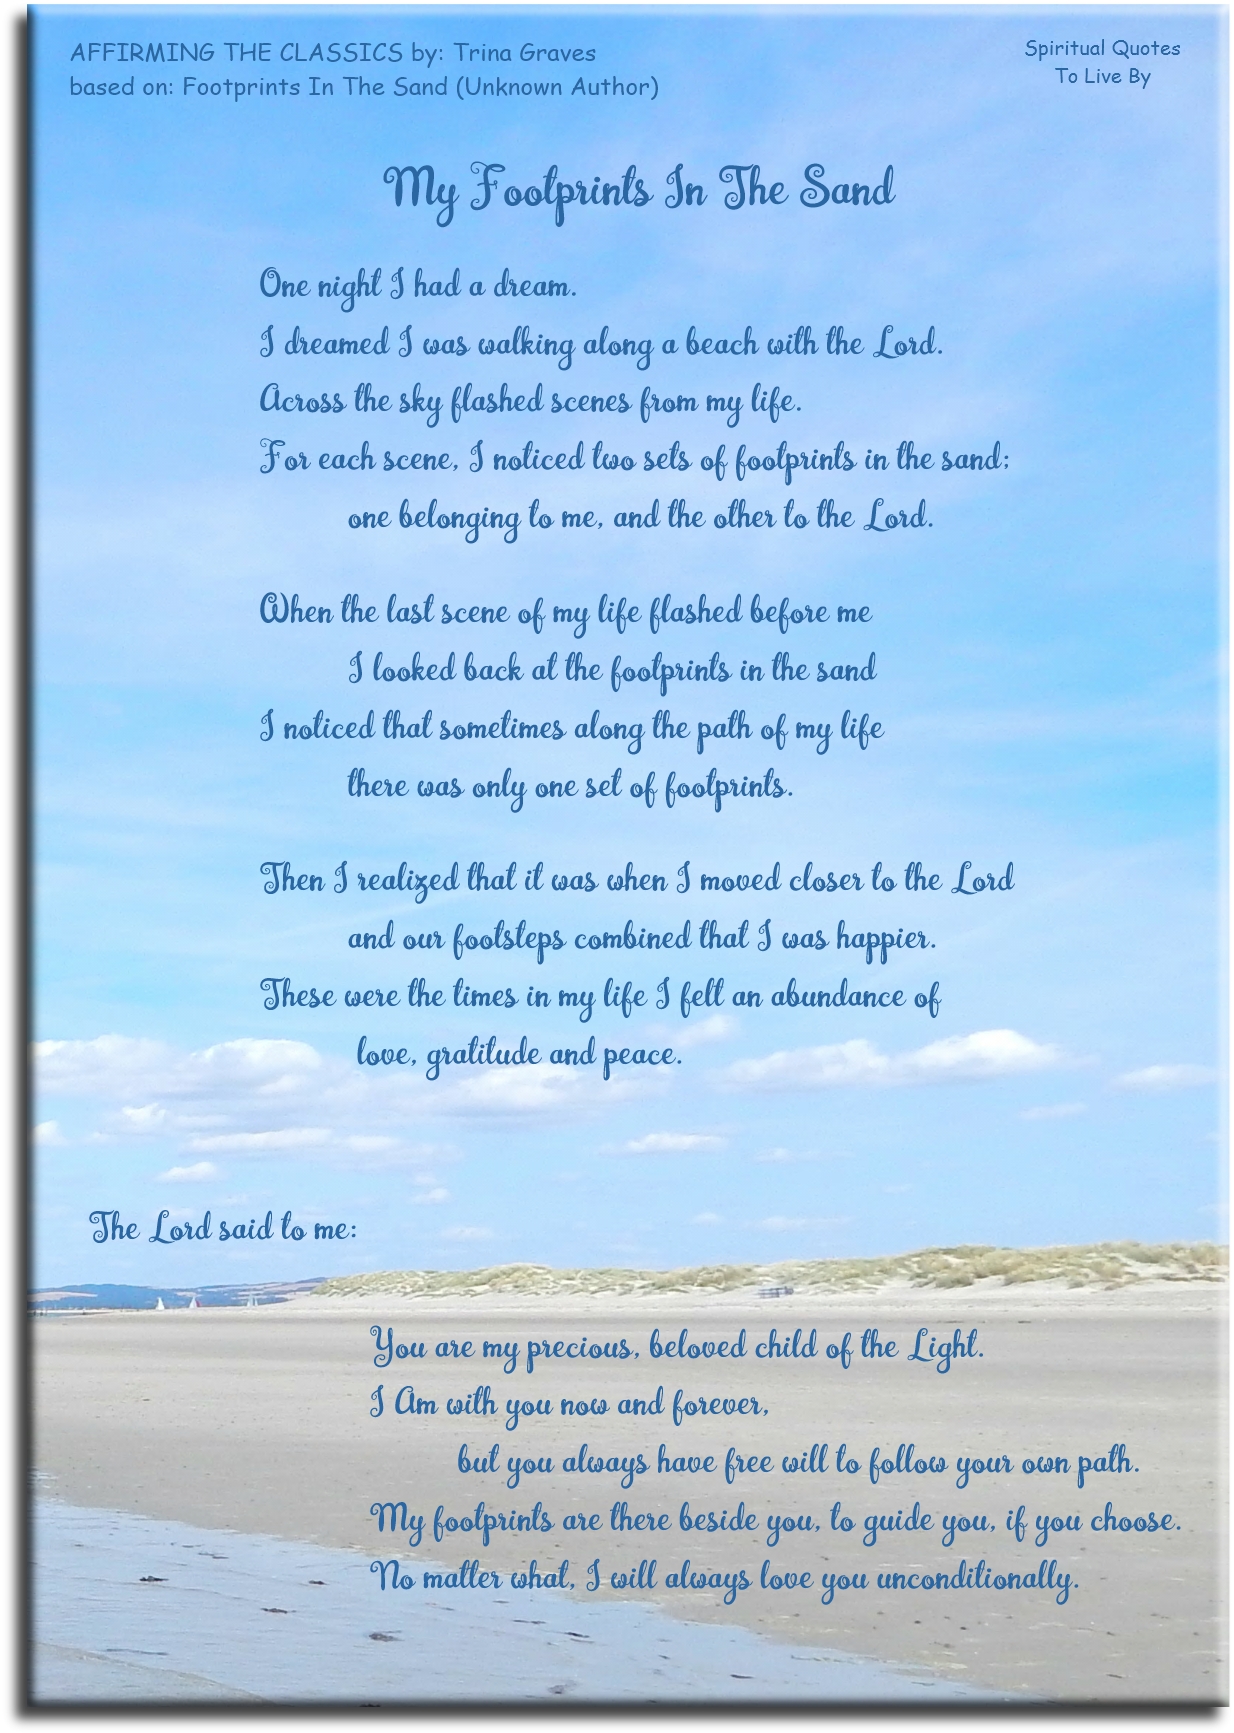 Affirming The Classics: My Footprints In The Sand - by Trina Graves of Spiritual Quotes To Live By